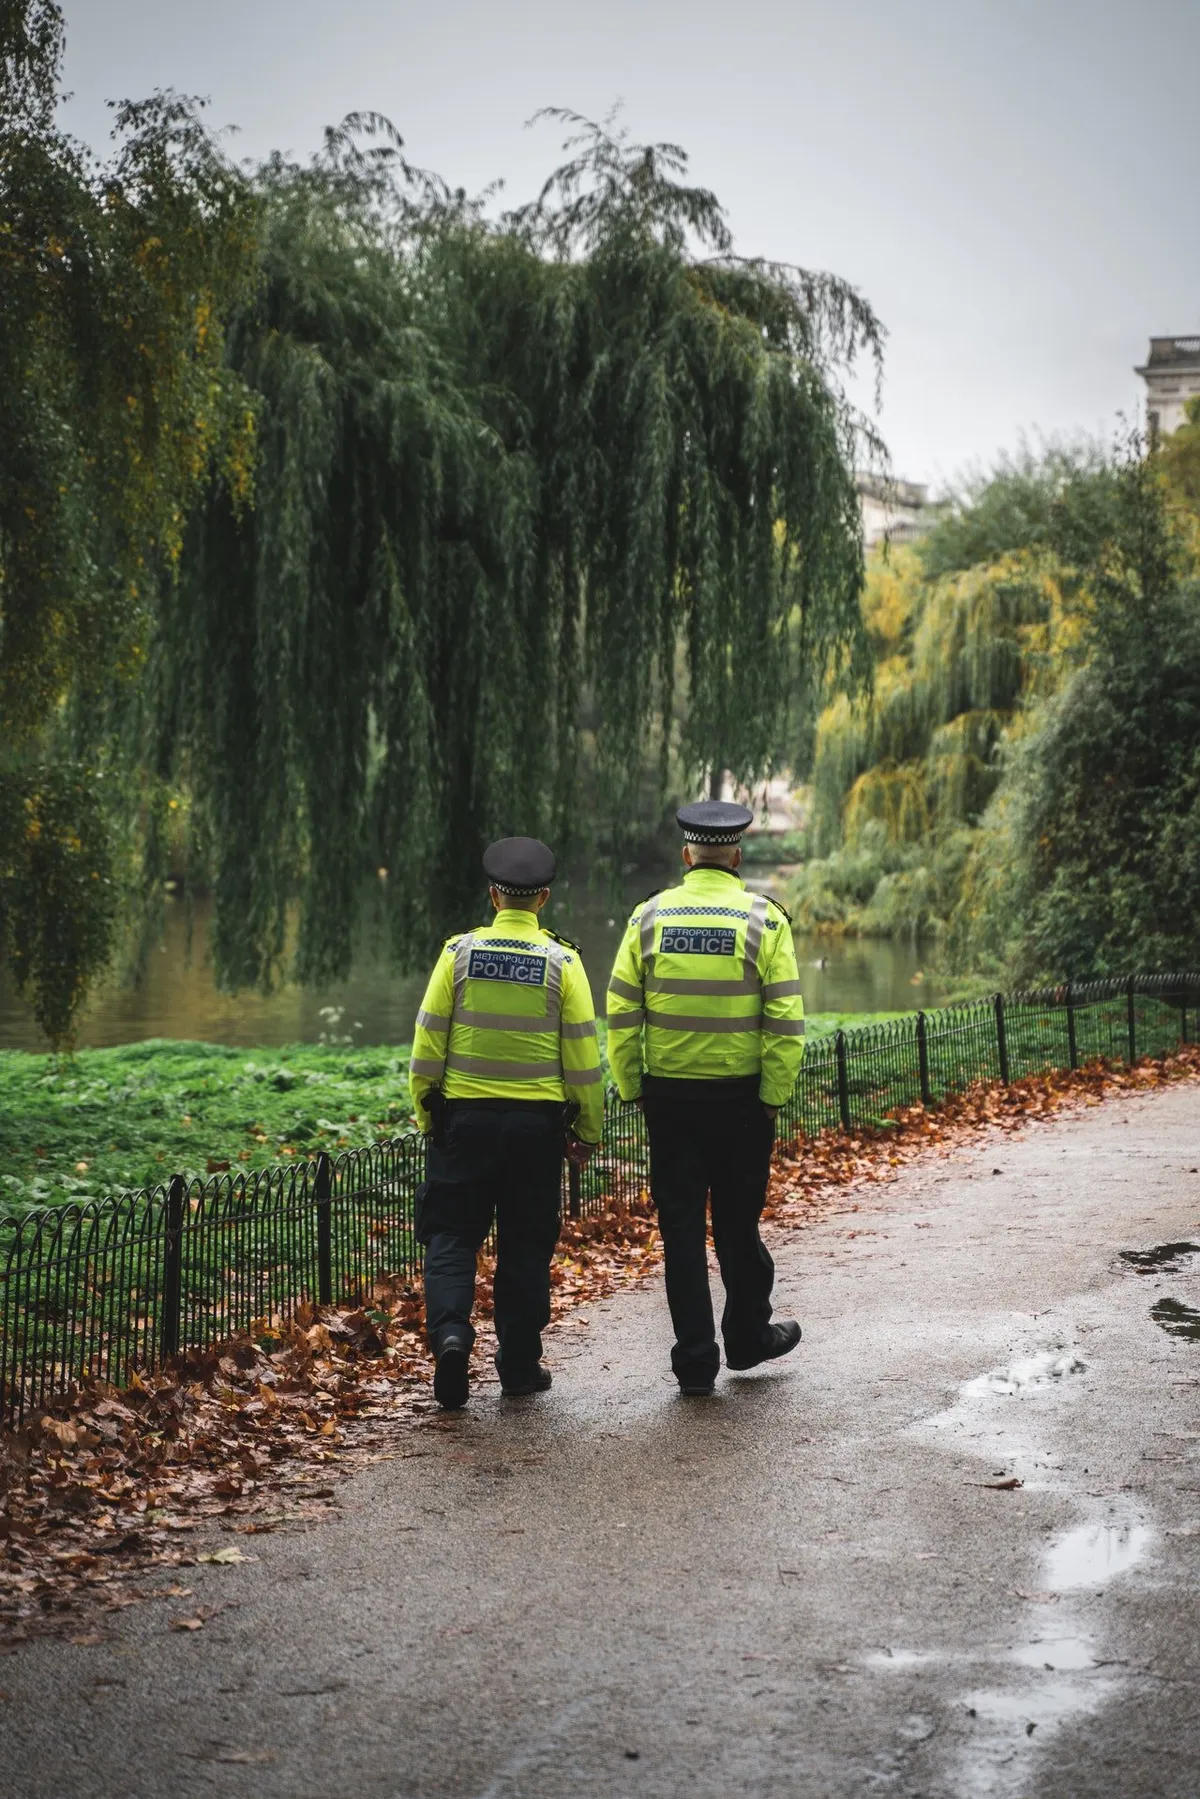 Photo of two policemen walking down the road | Photo: Pexels